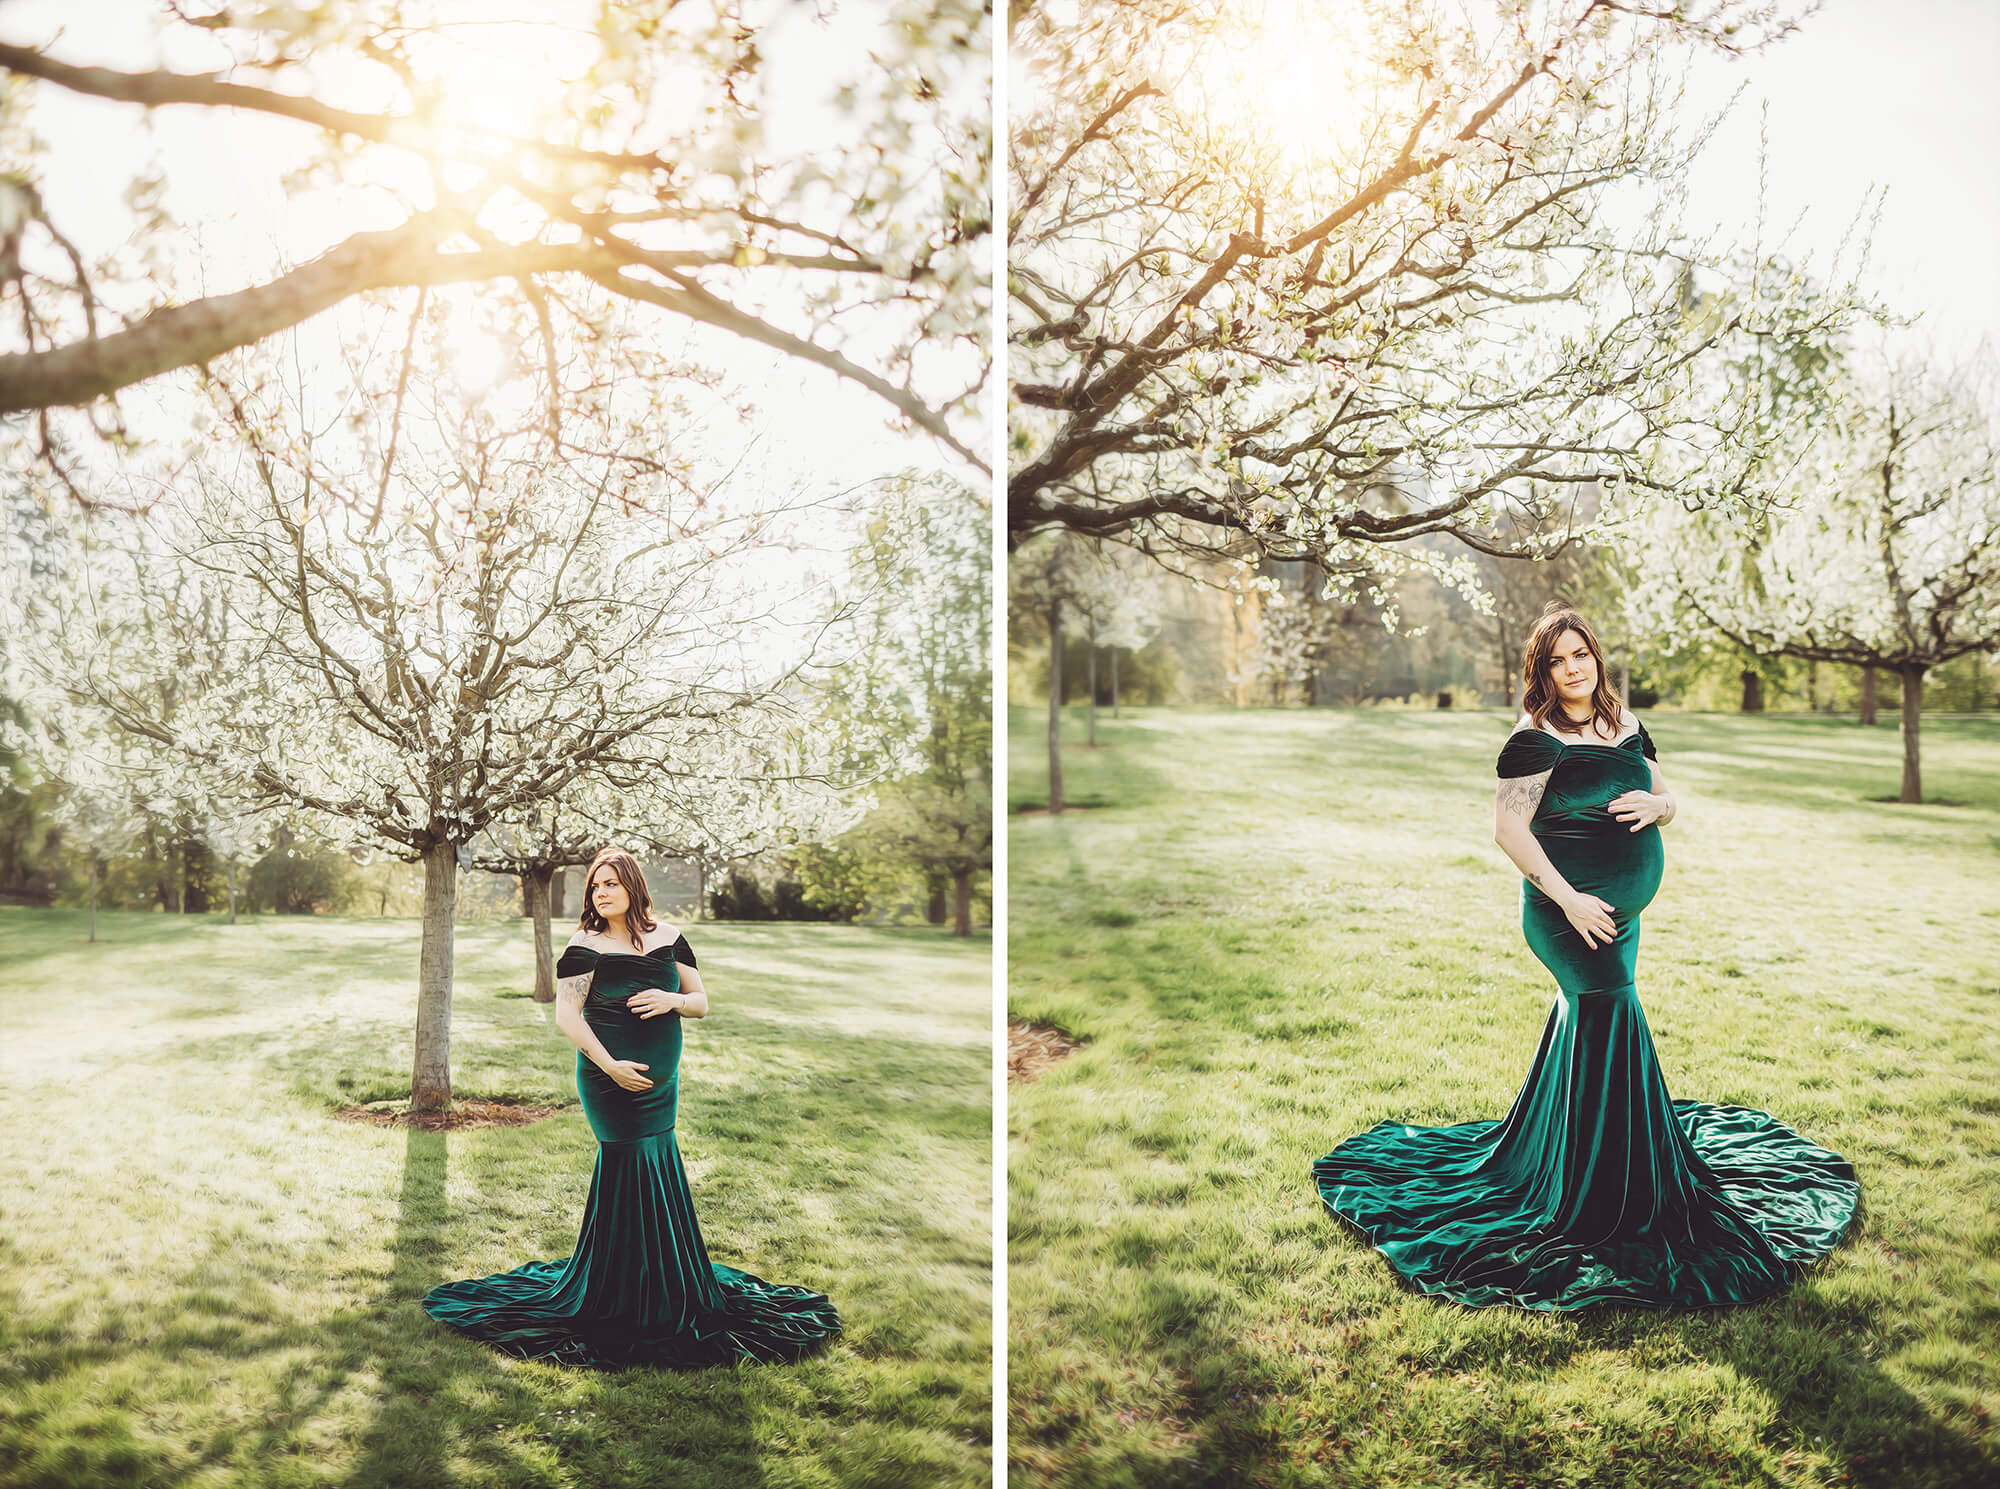 Christina looking breathtaking in her green velvet maternity gown for her session with Frankfurt maternity photographer